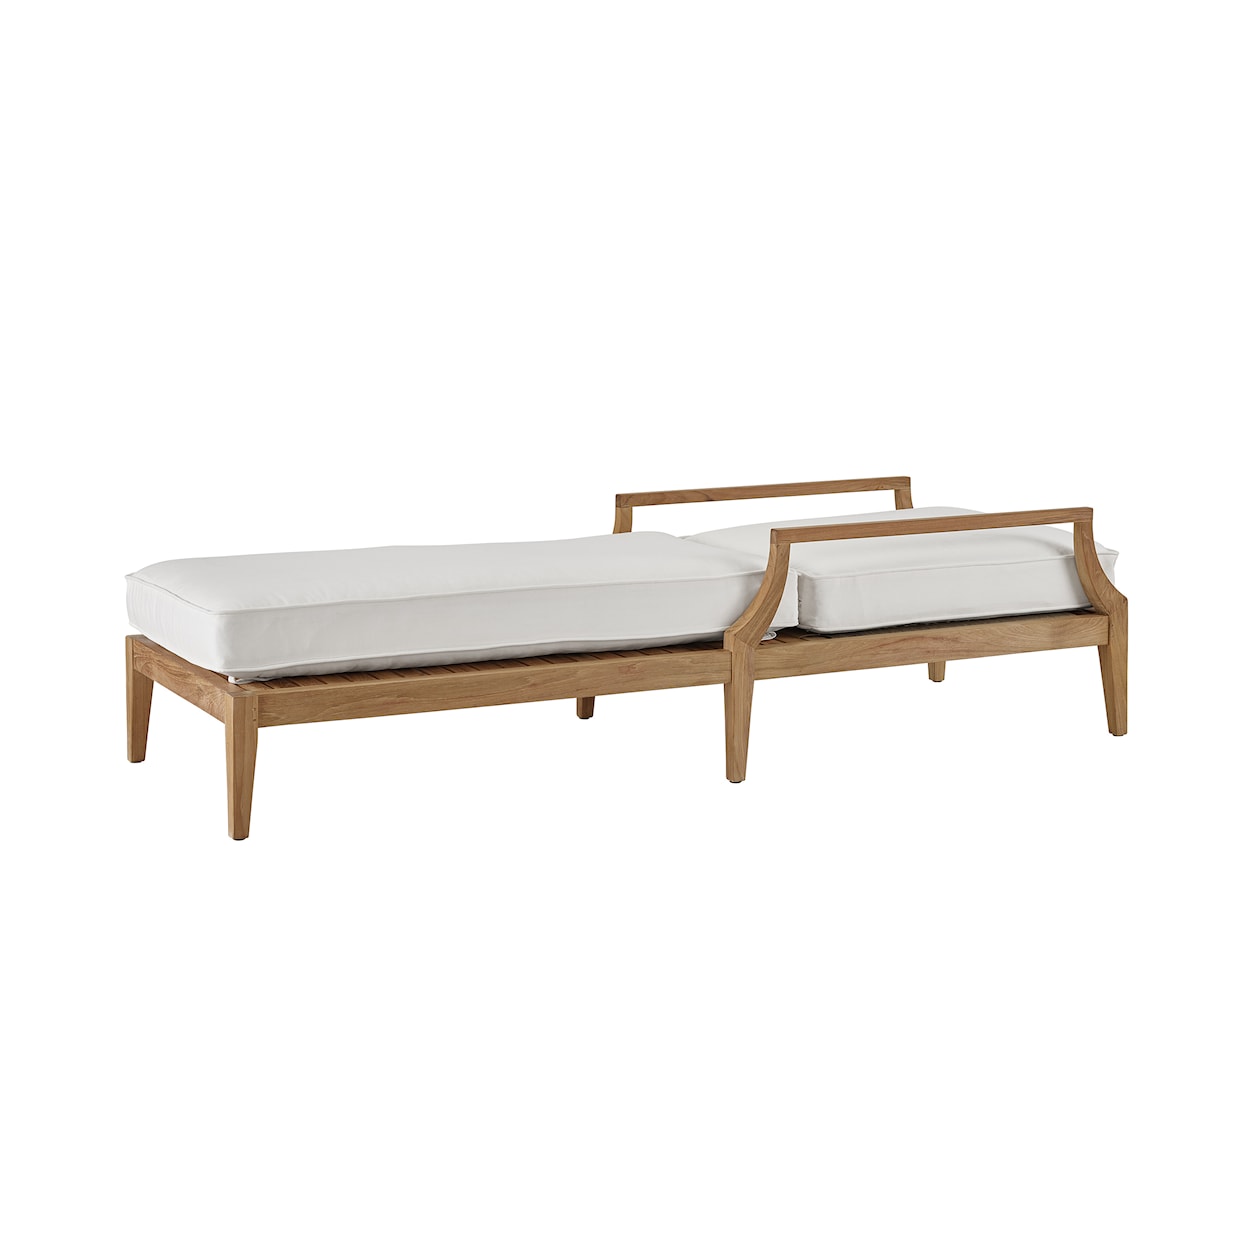 Universal Coastal Living Outdoor Outdoor Chesapeake Chaise Lounge